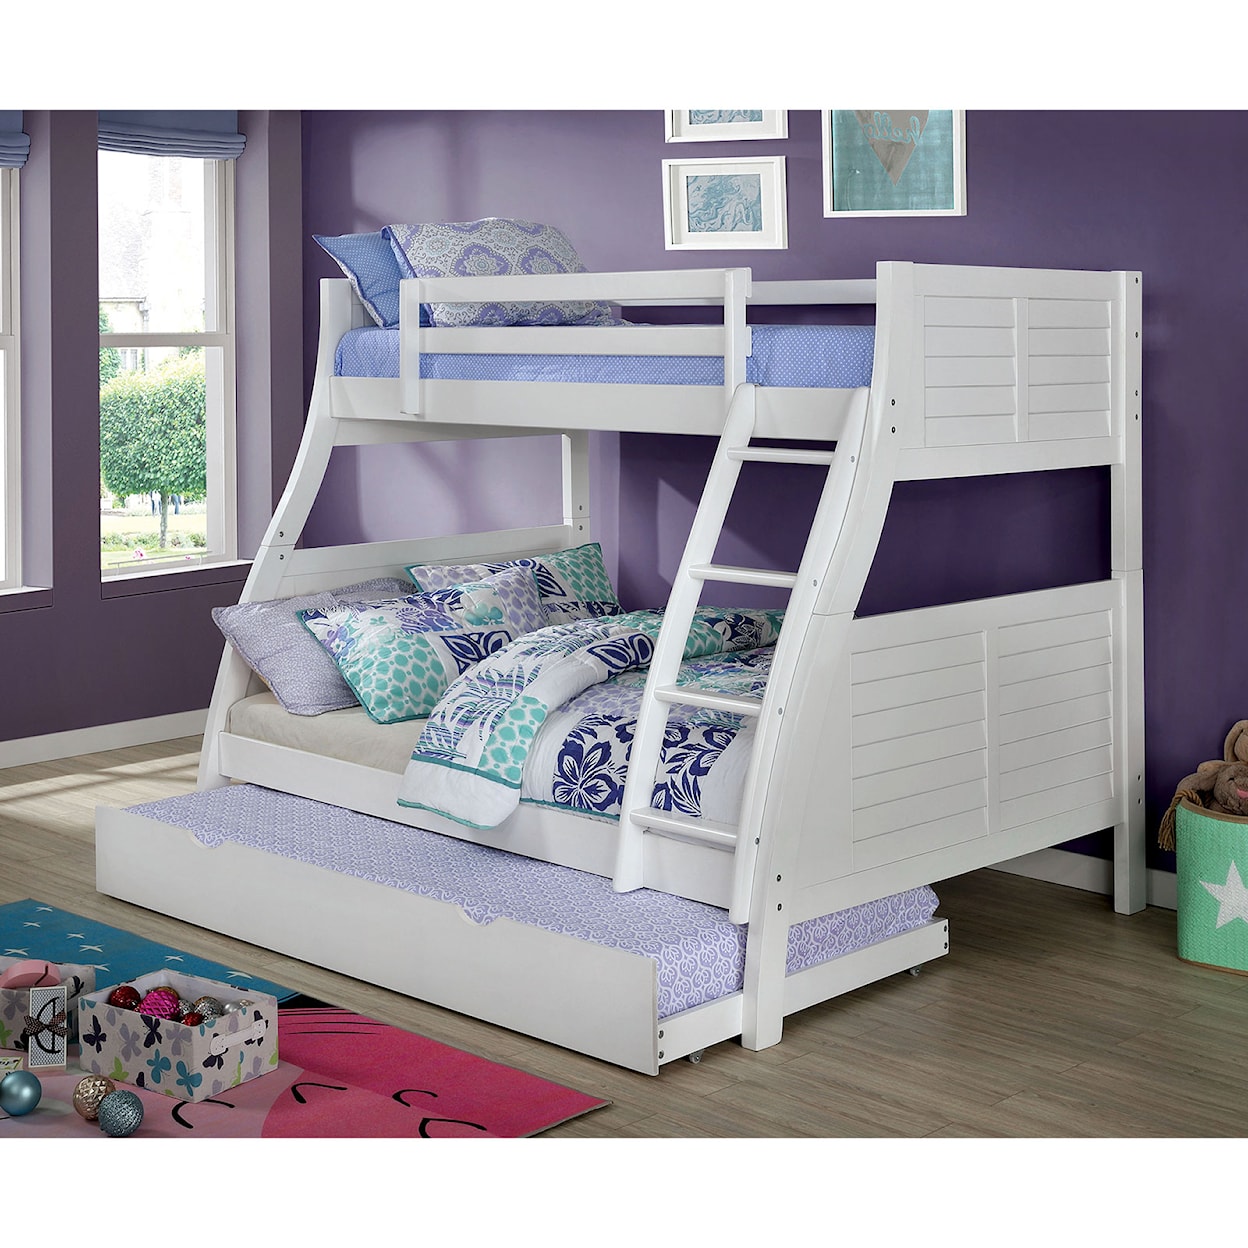 Furniture of America Hoople Twin Over Full Bunk Bed